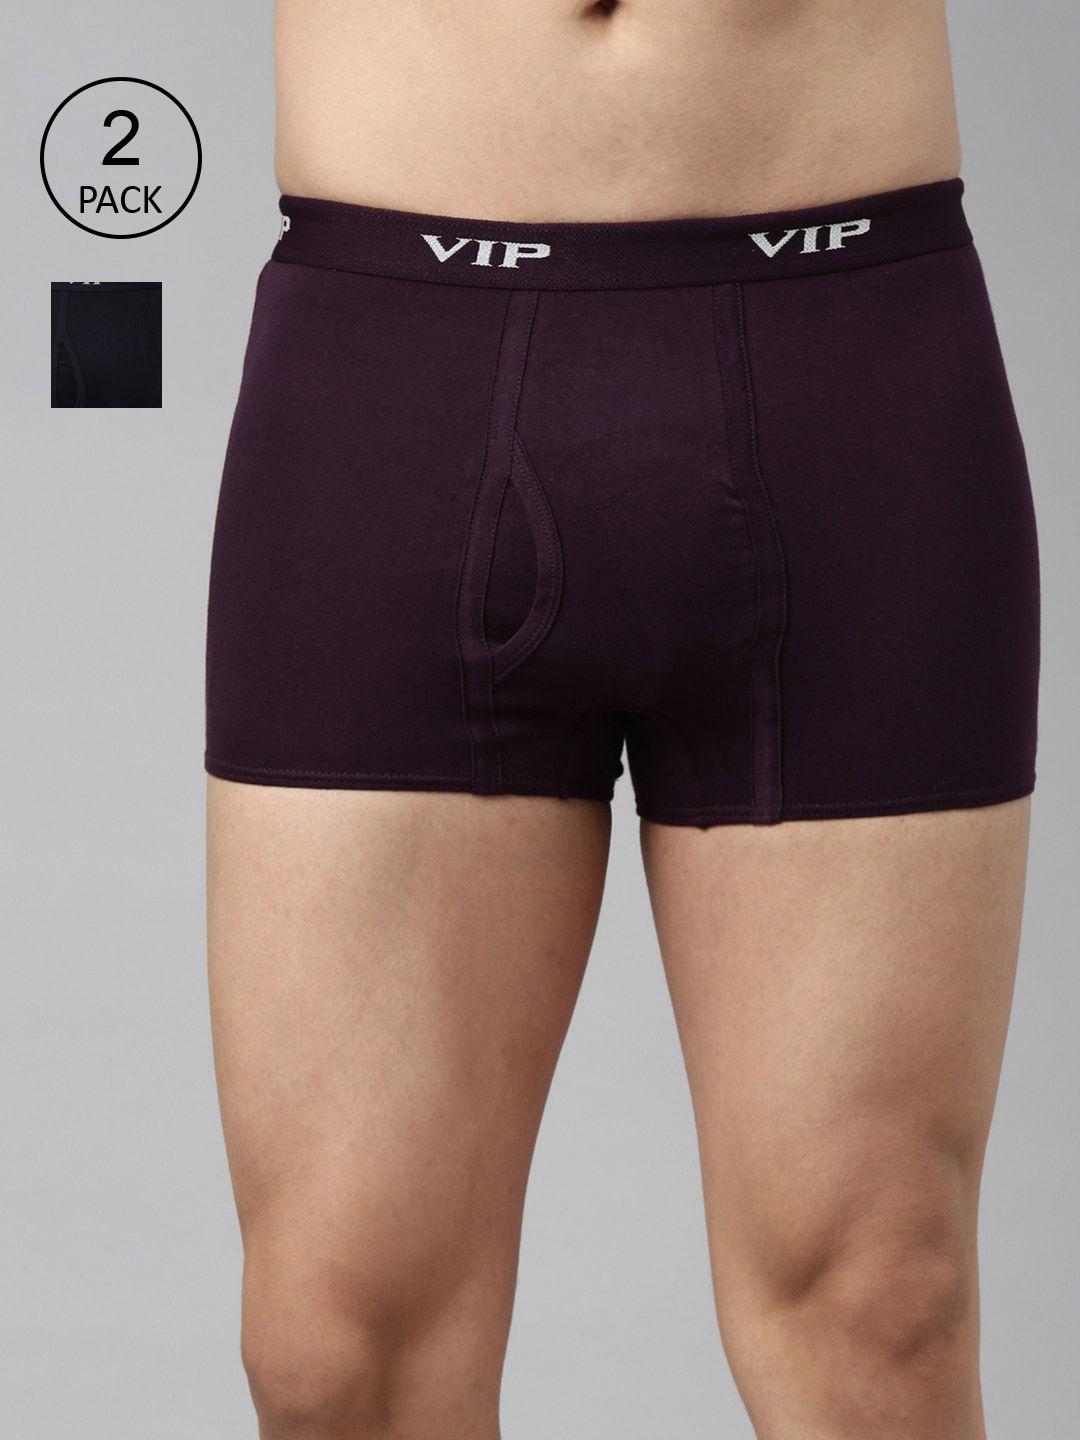 vip men pack of 2 assorted pure cotton trunks punchp1_110